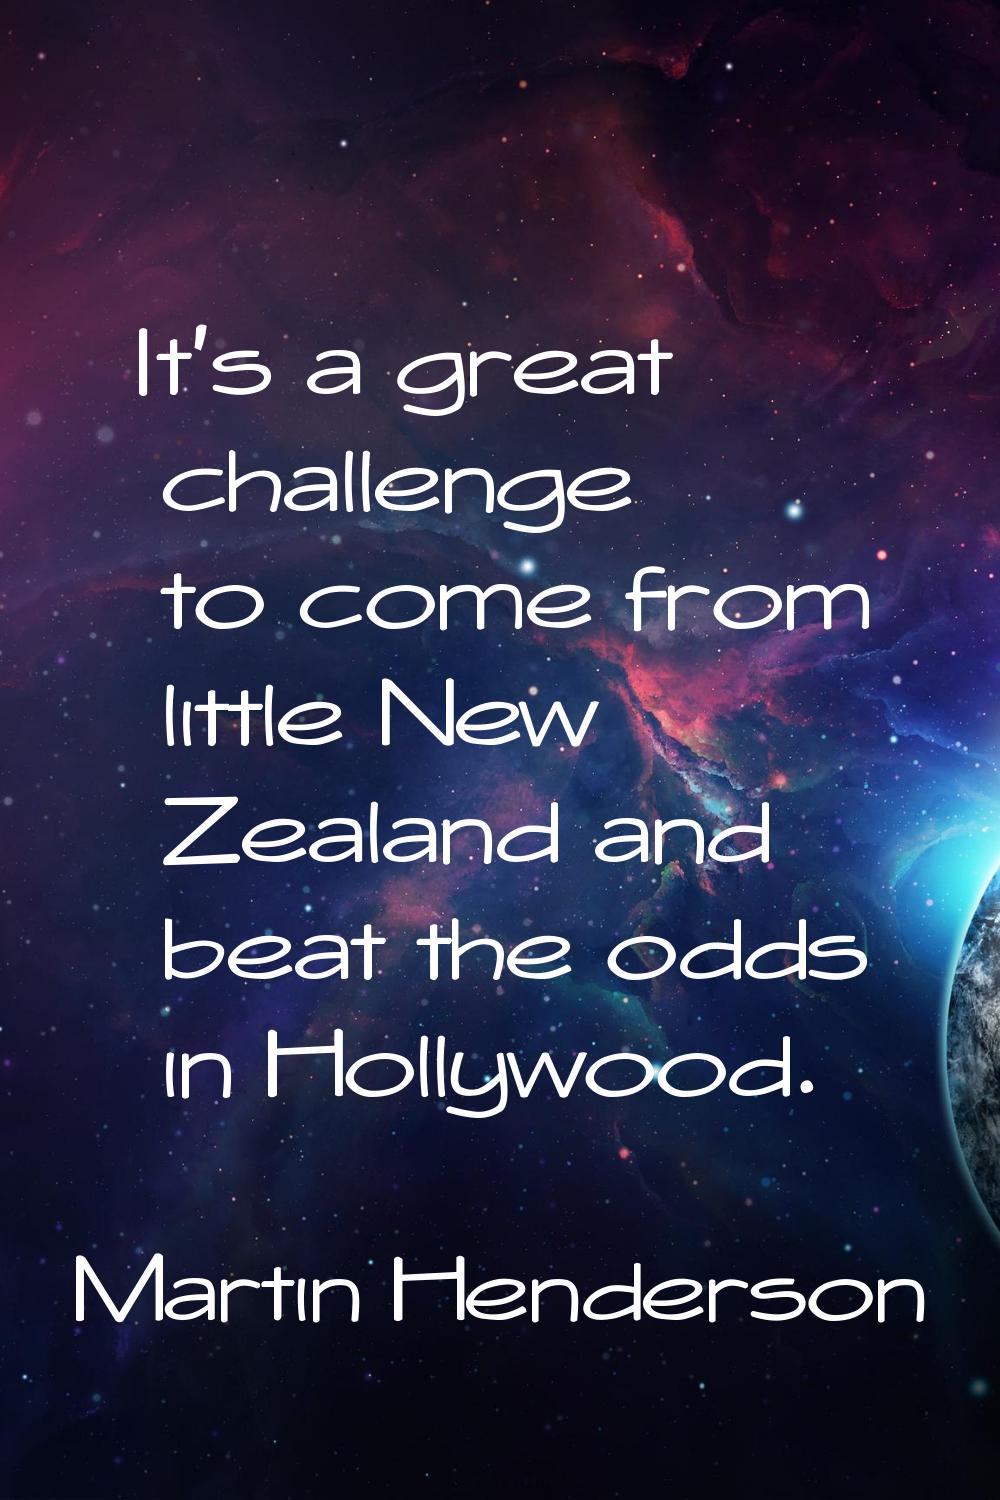 It's a great challenge to come from little New Zealand and beat the odds in Hollywood.